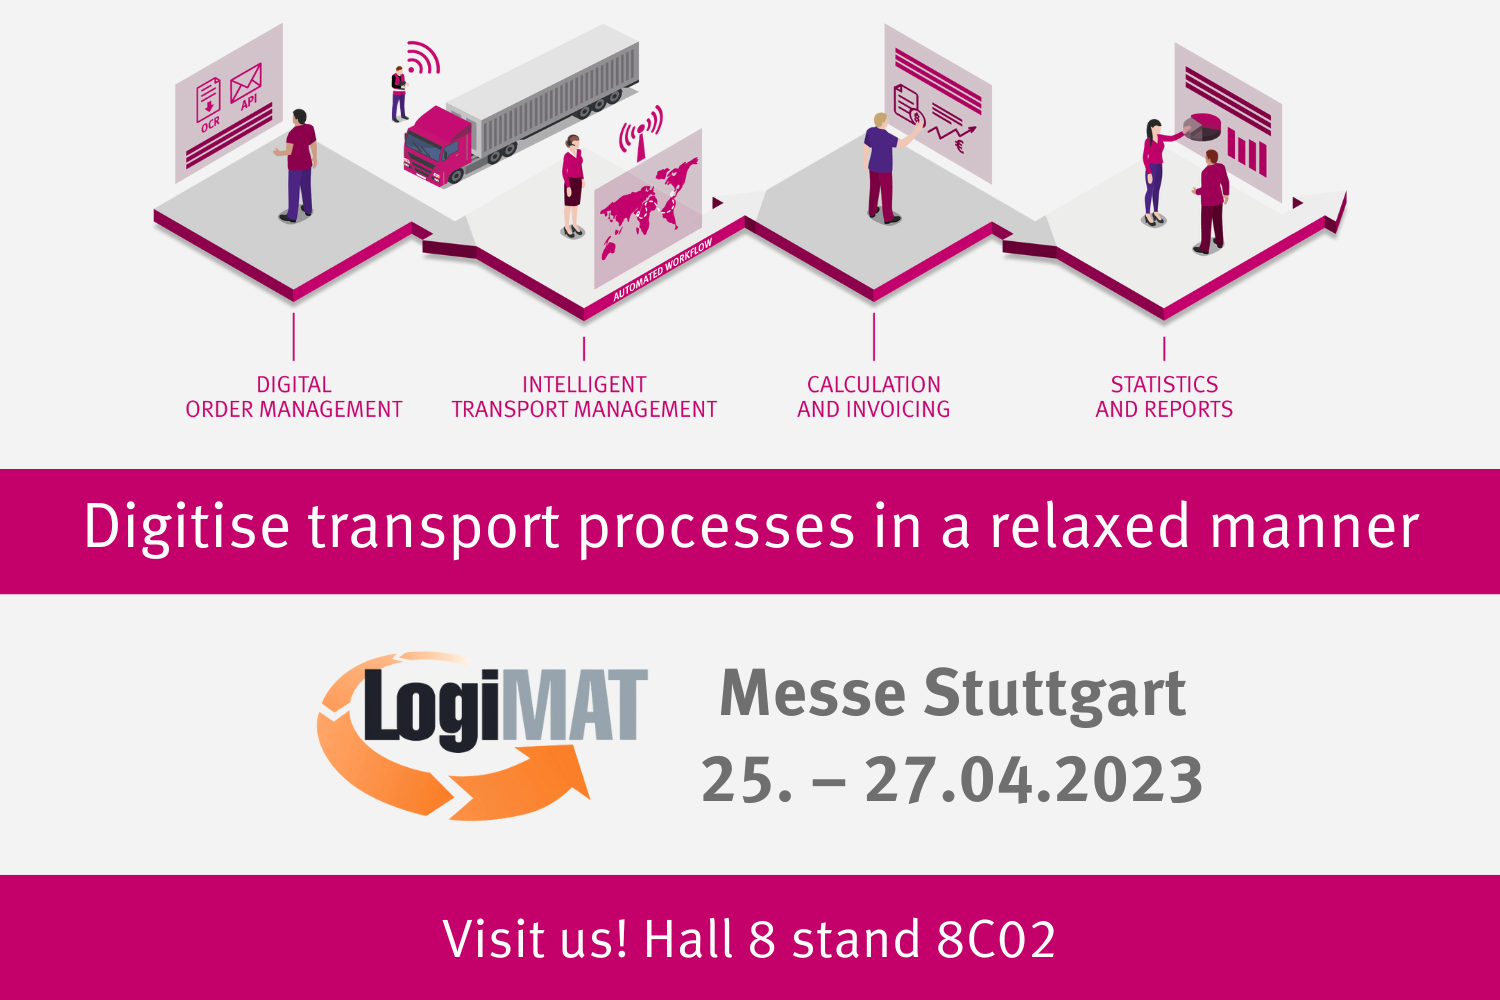 Soloplan at the LogiMAT fair in Stuttgart 2023: Relaxed digitalisation with CarLo